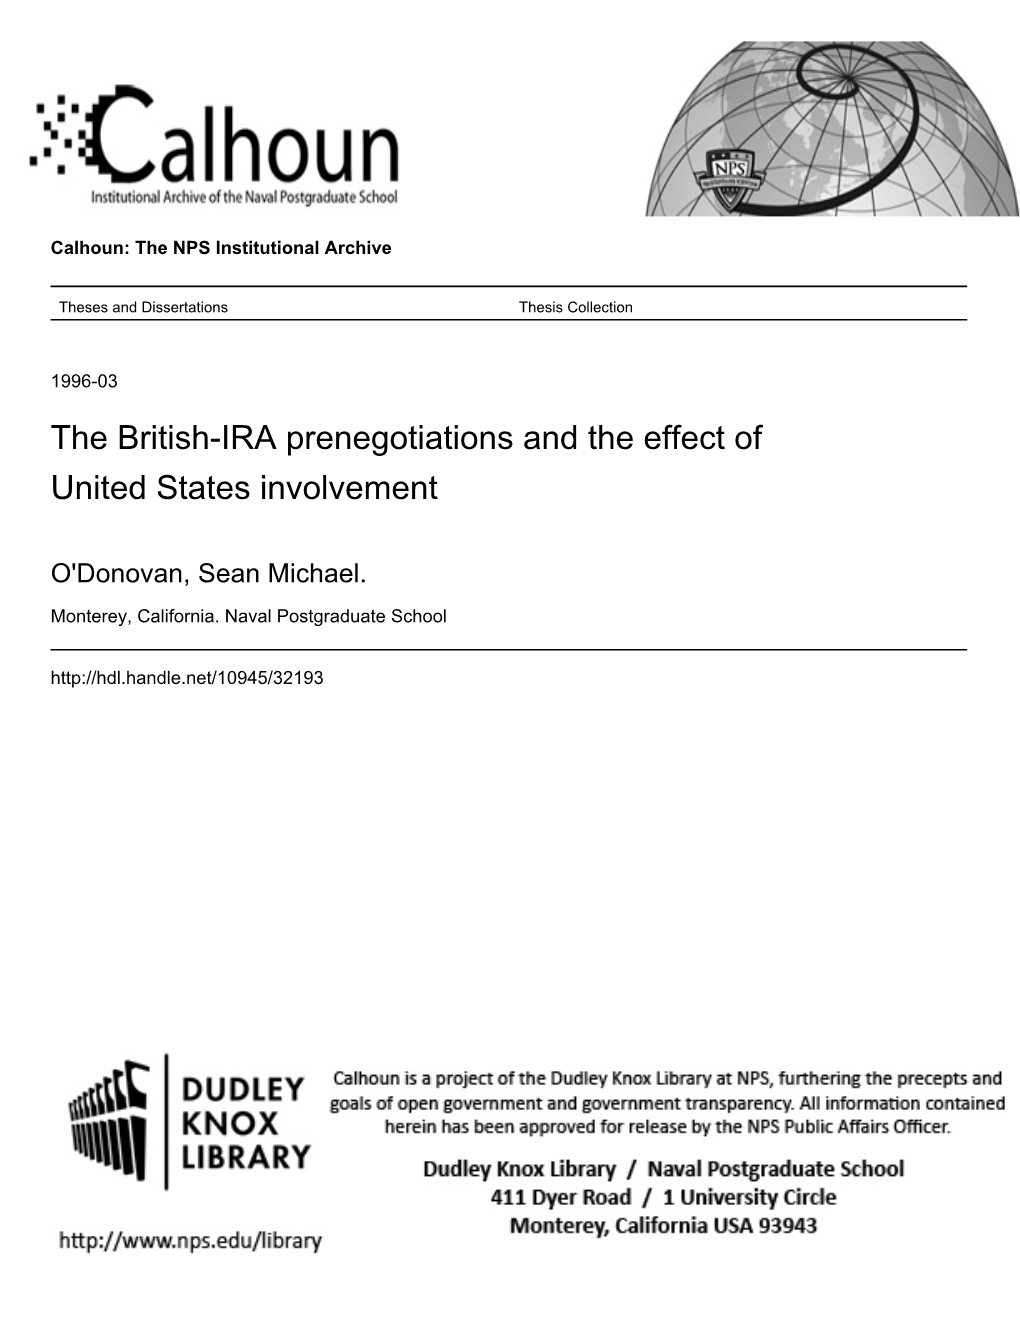 The British-IRA Prenegotiations and the Effect of United States Involvement